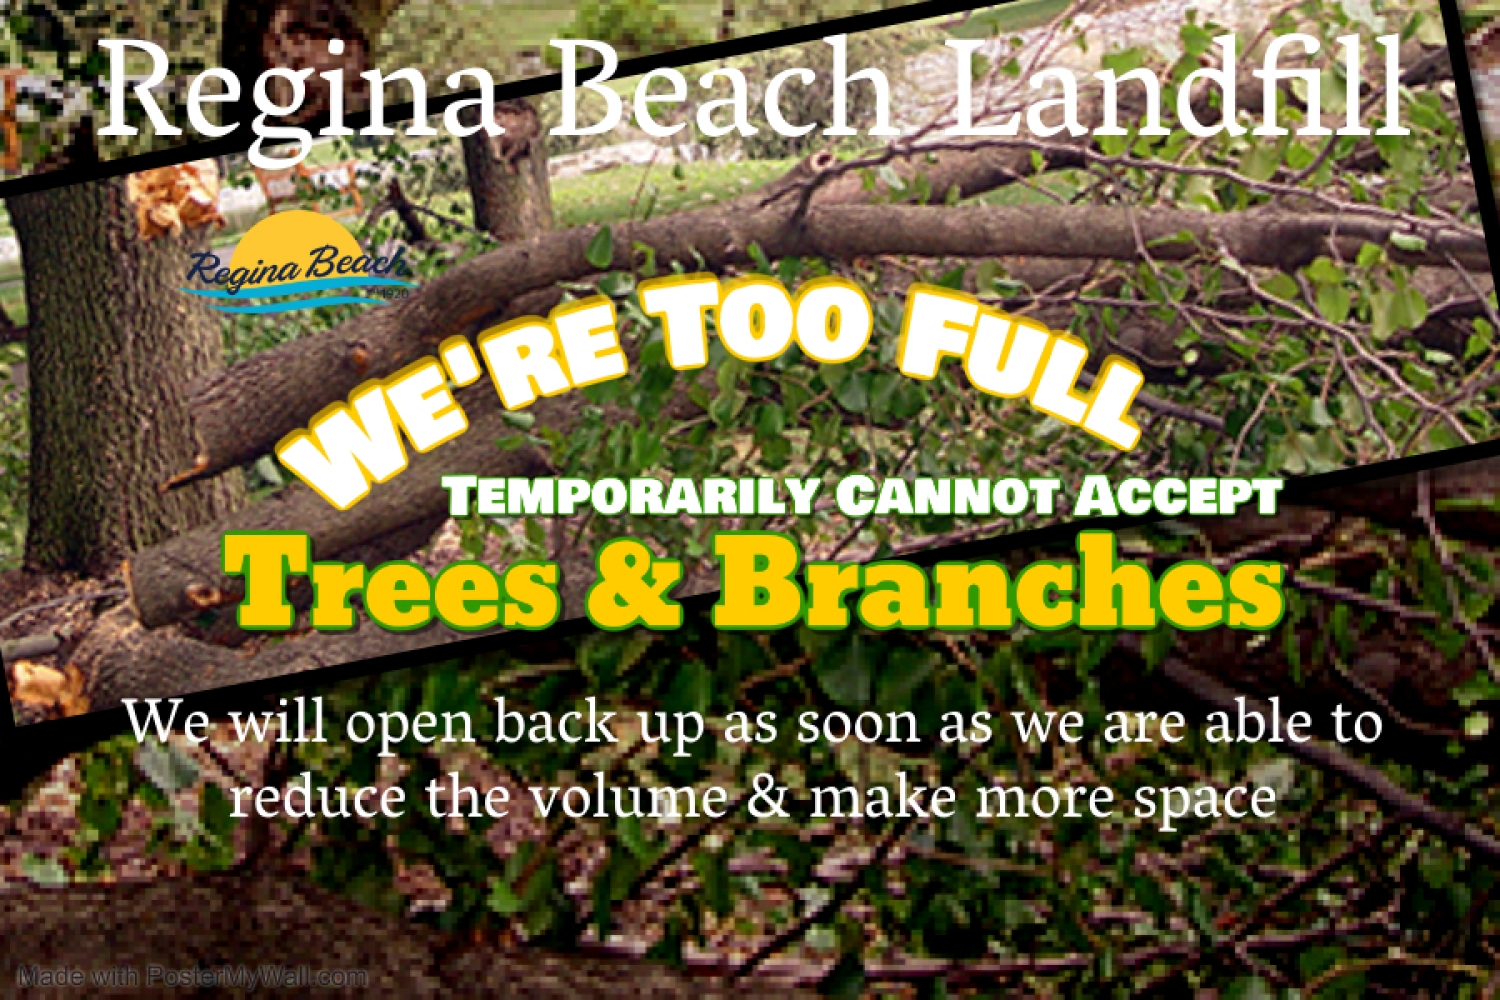 Landfill Temporarirly Cannot Accept Trees & Branches